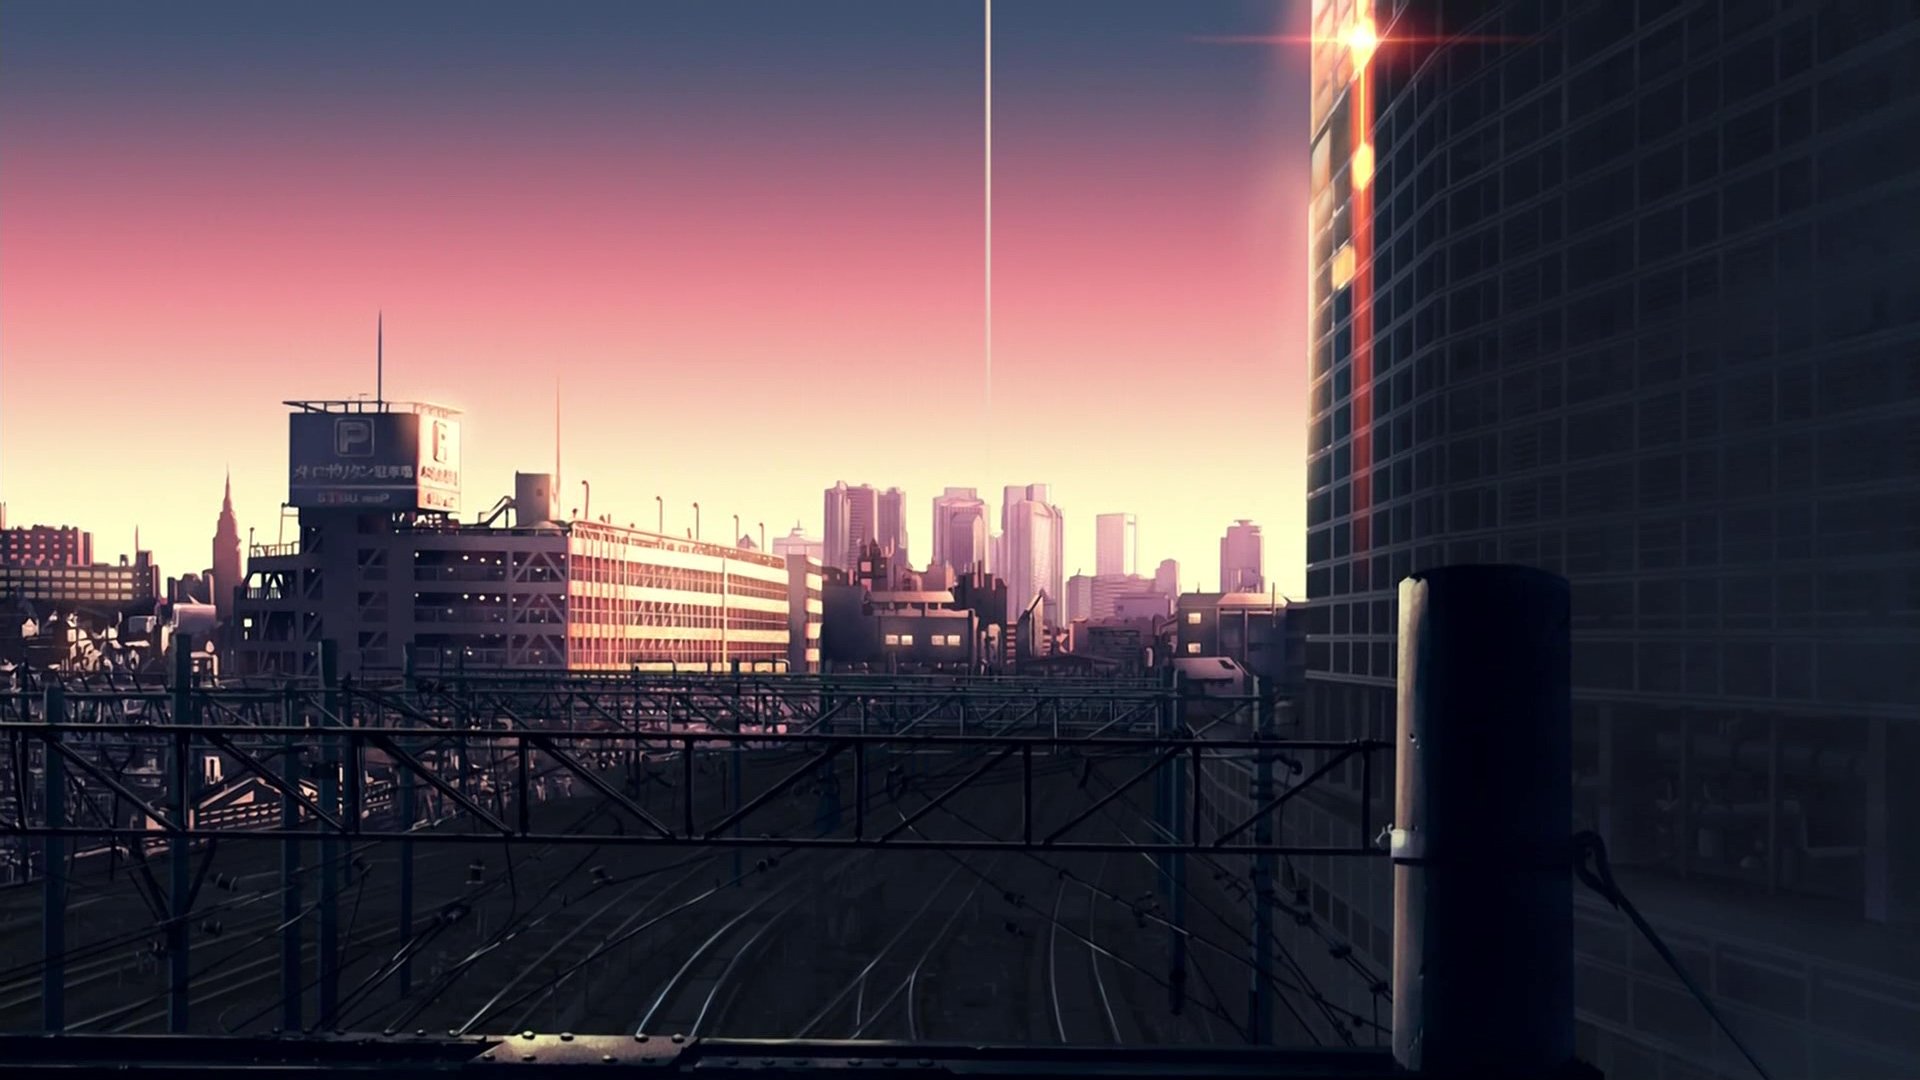 sunset, Cityscapes, Architecture, Buildings, Railroad, Tracks, Anime, The, Place, Promised, In, Our, Early, Days Wallpaper